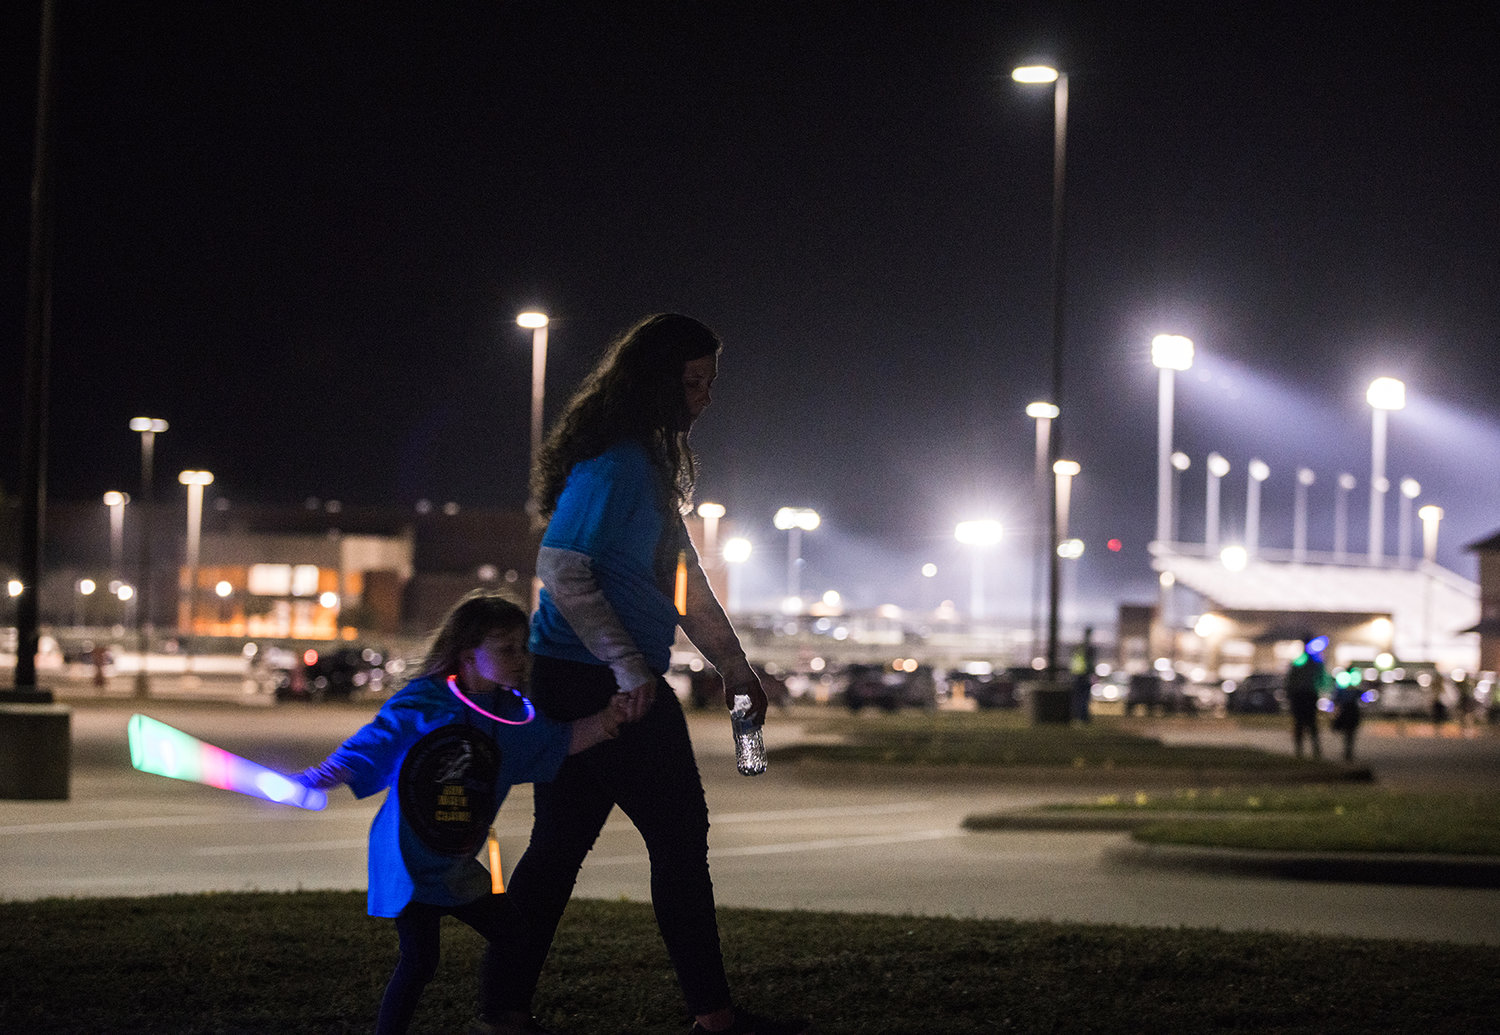 All ages participated in the 5K Glow Race "Run, Walk or Crawl"